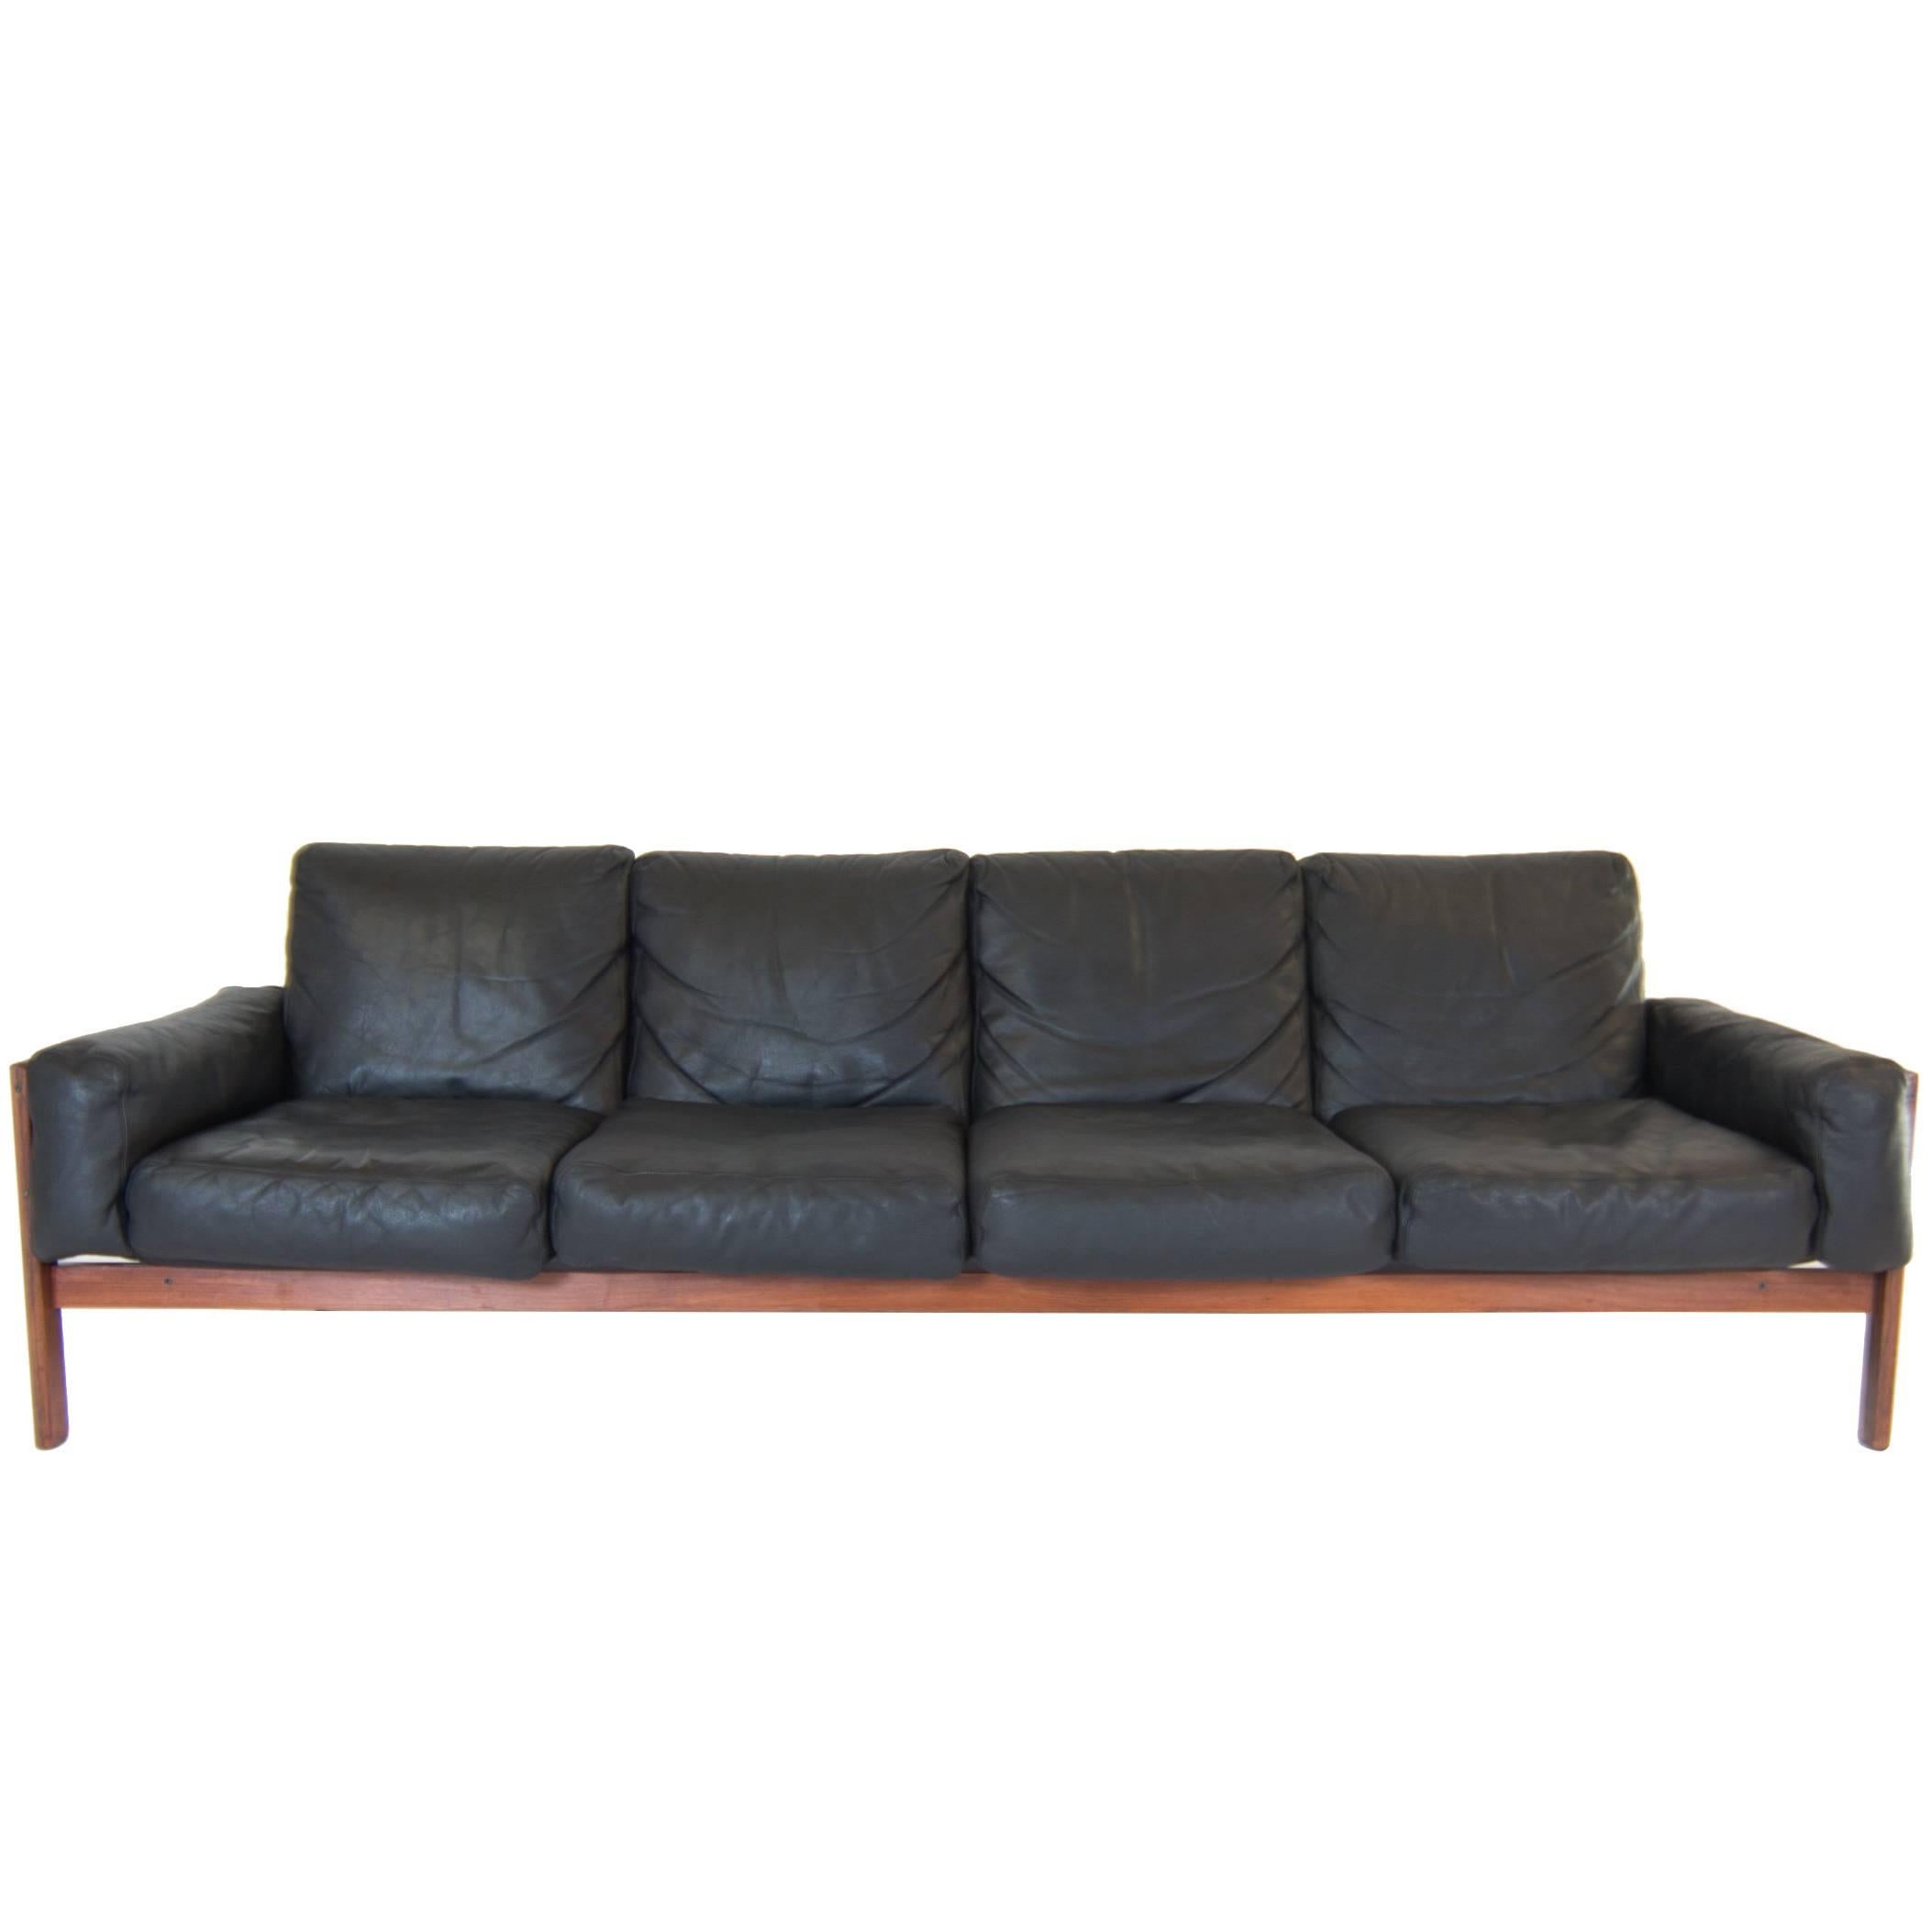 Sven Ivar Dysthe Four-Seat Sofa with Original Black Leather Upholstery For Sale